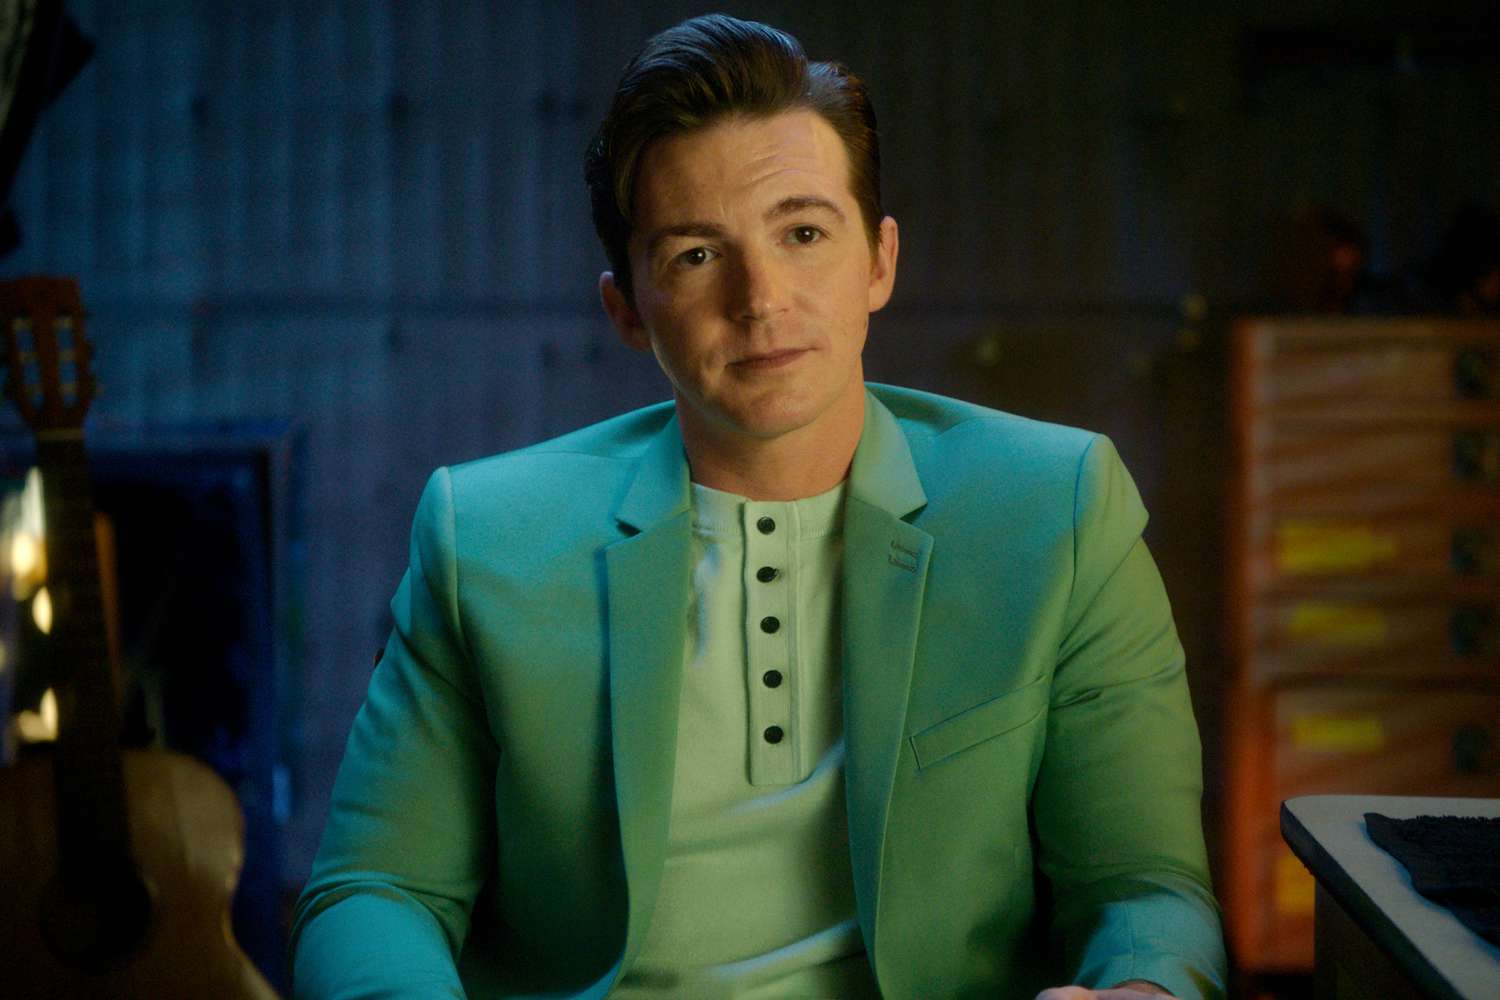 Drake Bell Defends His Mom For Not Protecting Him In Quiet On Set Bonus Episode